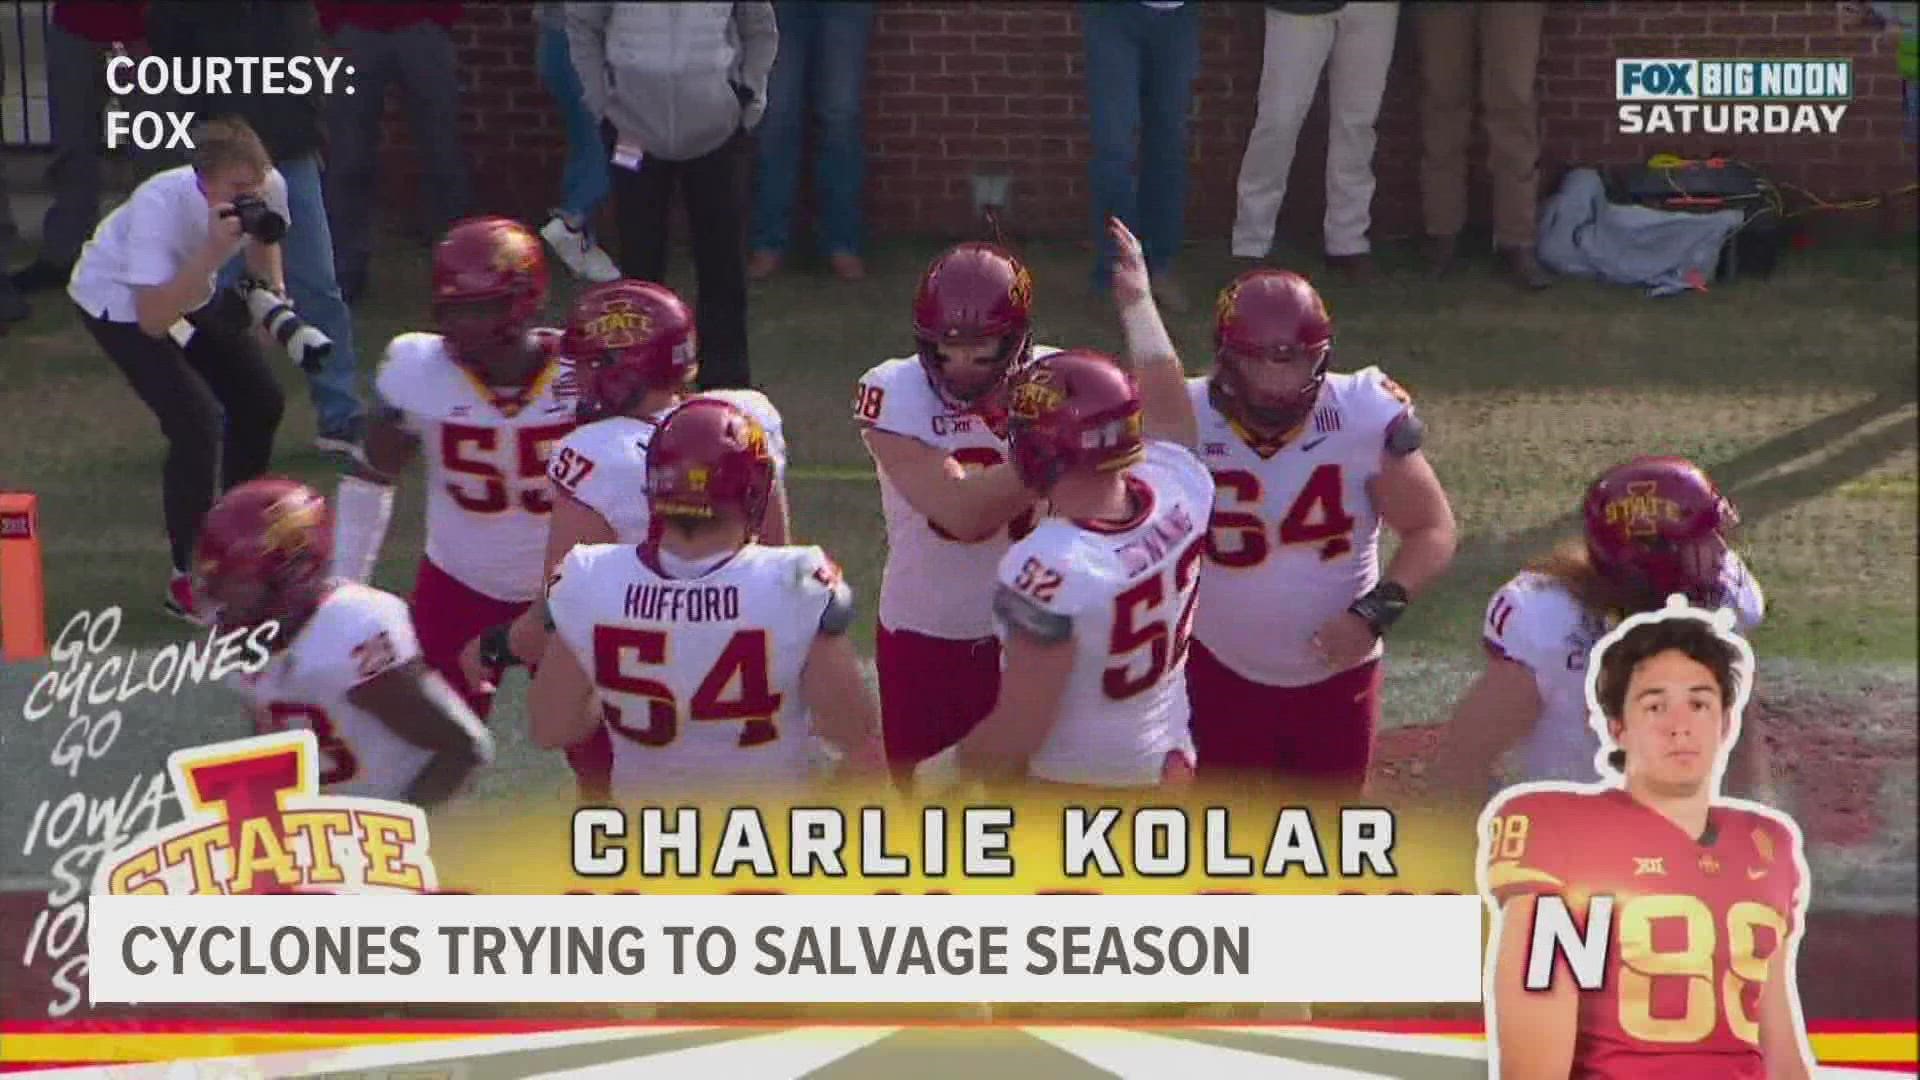 The Cyclones' Charlie Kolar had career highs of 12 catches and 152 yards.